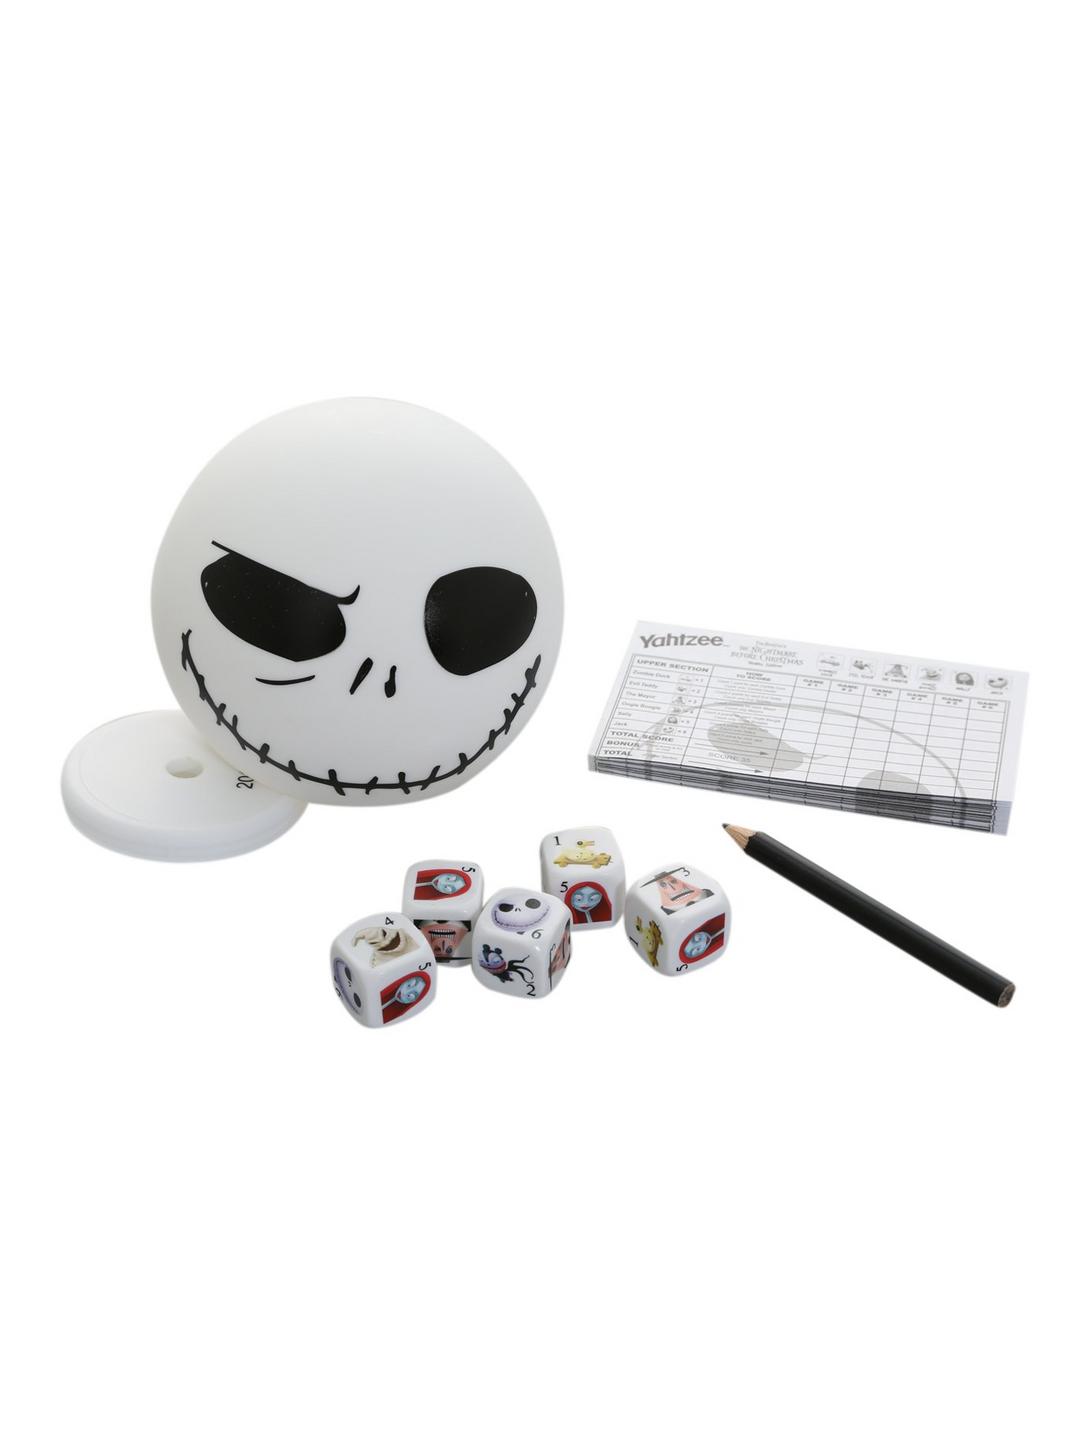 The Nightmare Before Christmas Edition Yahtzee Game, , hi-res